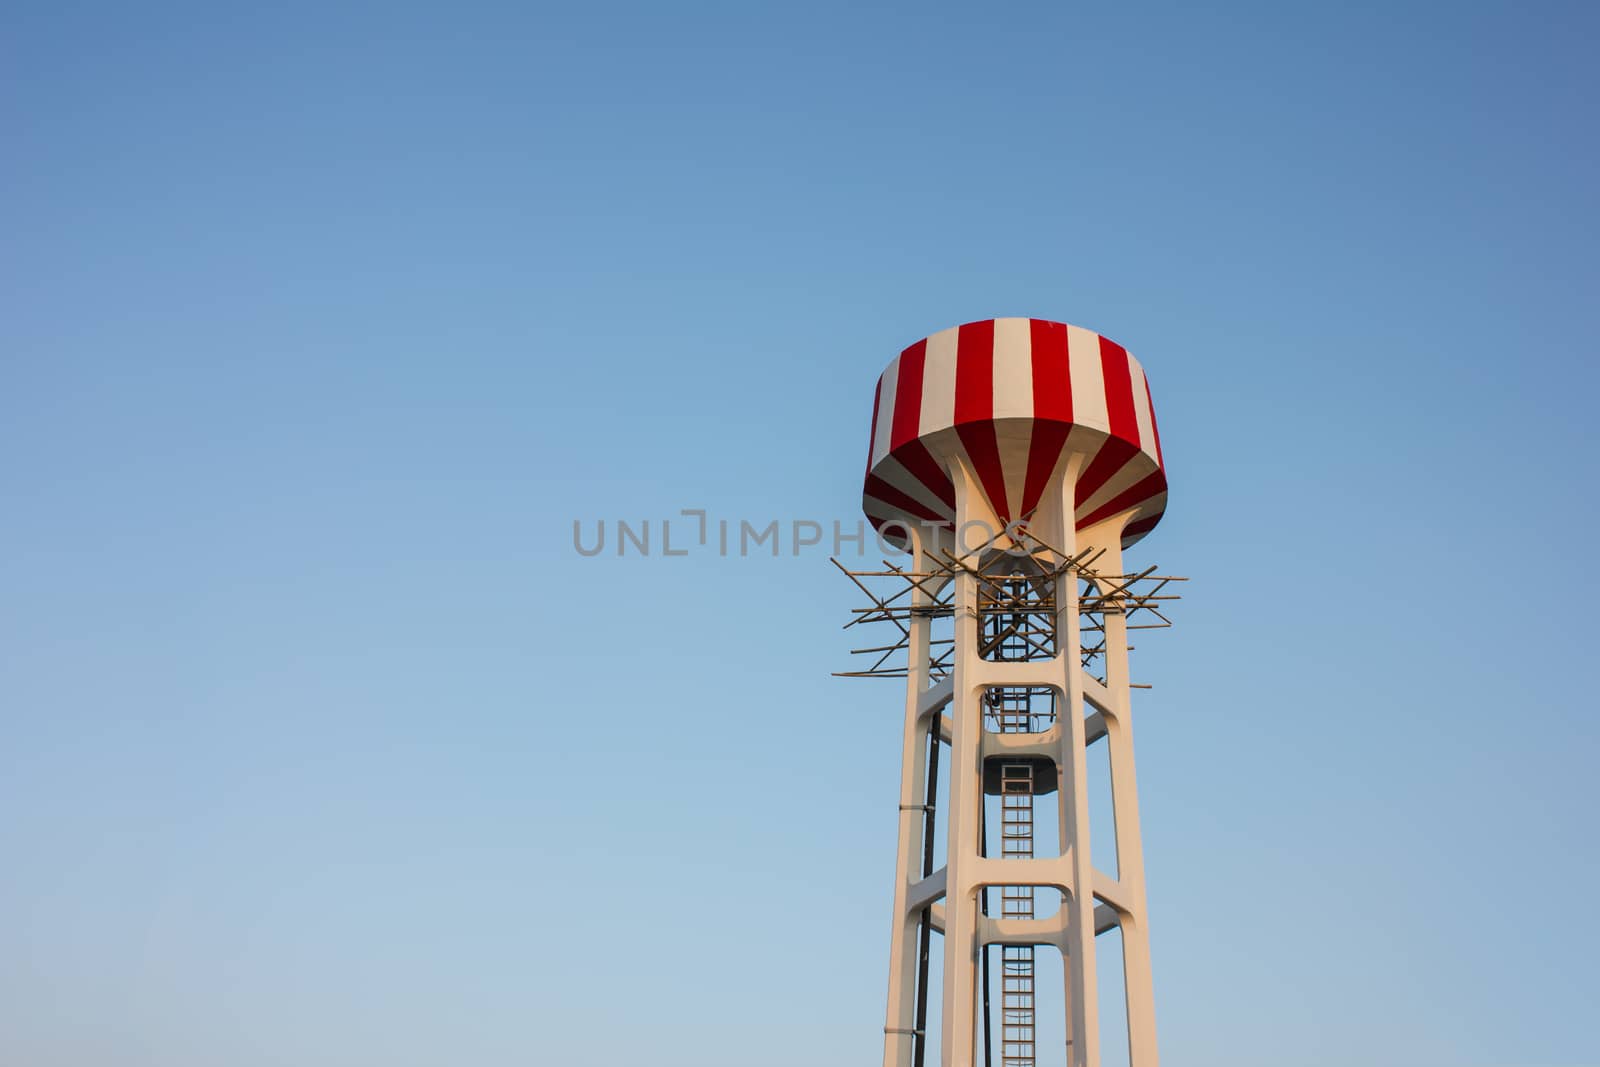 Water tower with red and white stripes (blue sky background)